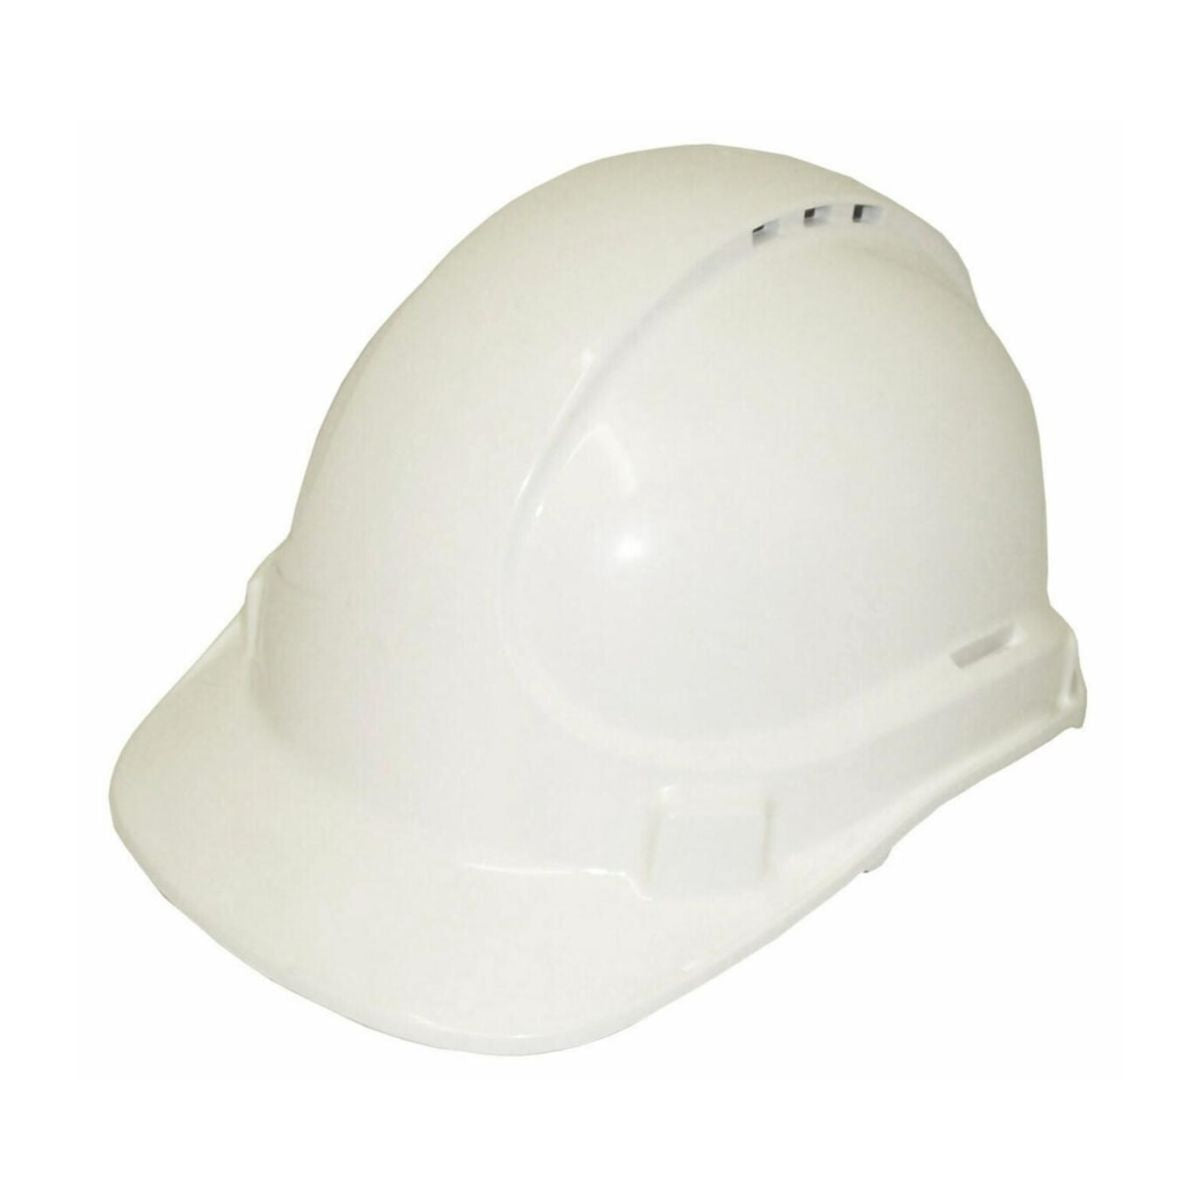 3M™ Safety Helmet ABS Type 1 Vented TA570